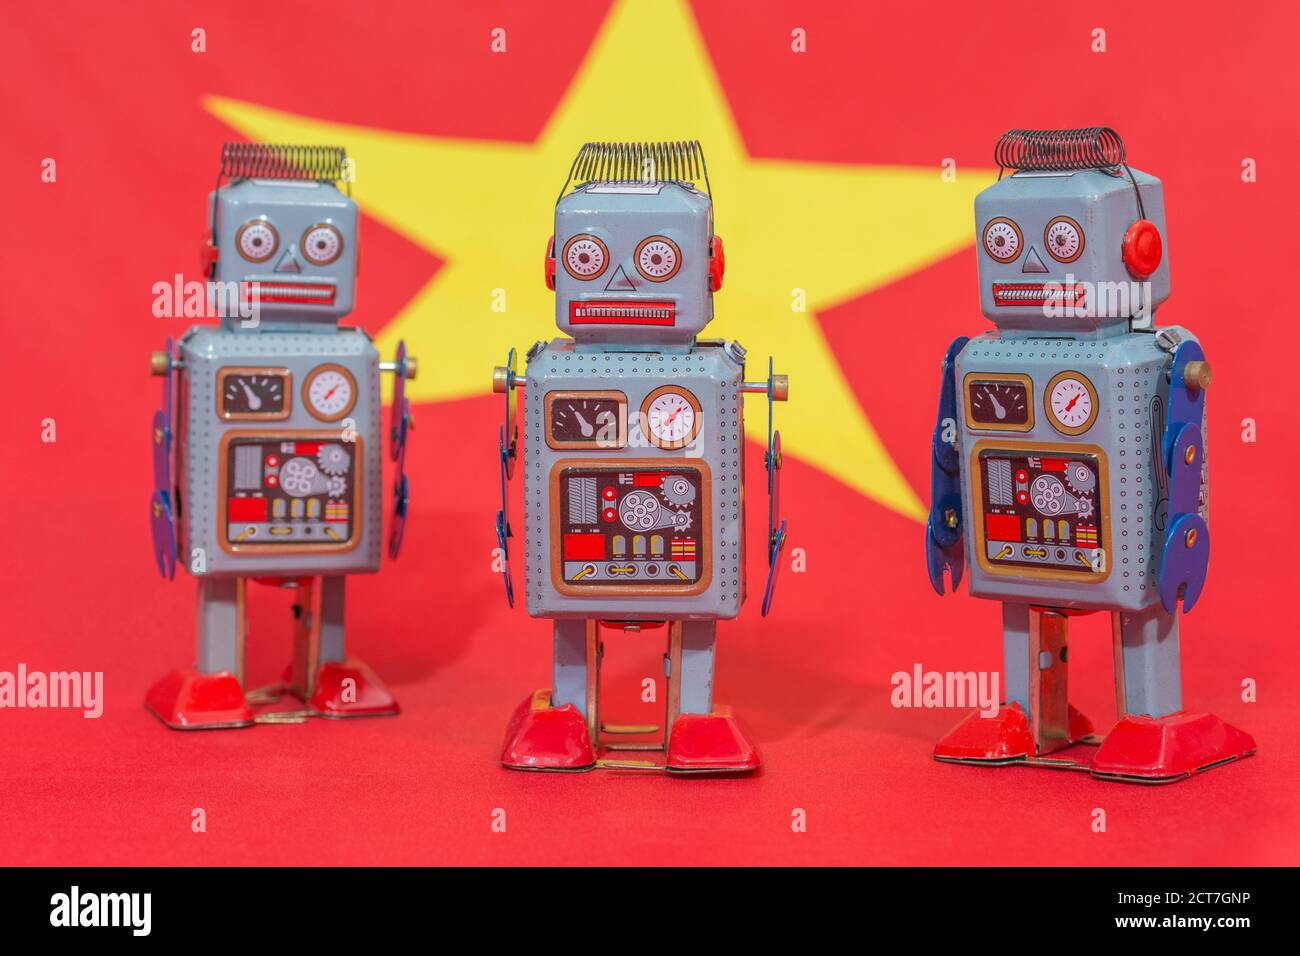 Wind-up clockwork toy robot on Chinese flag b/gd. For Chinese bots influencing US elections, advances in Chinese AI, China troll farm, China AI Stock Photo